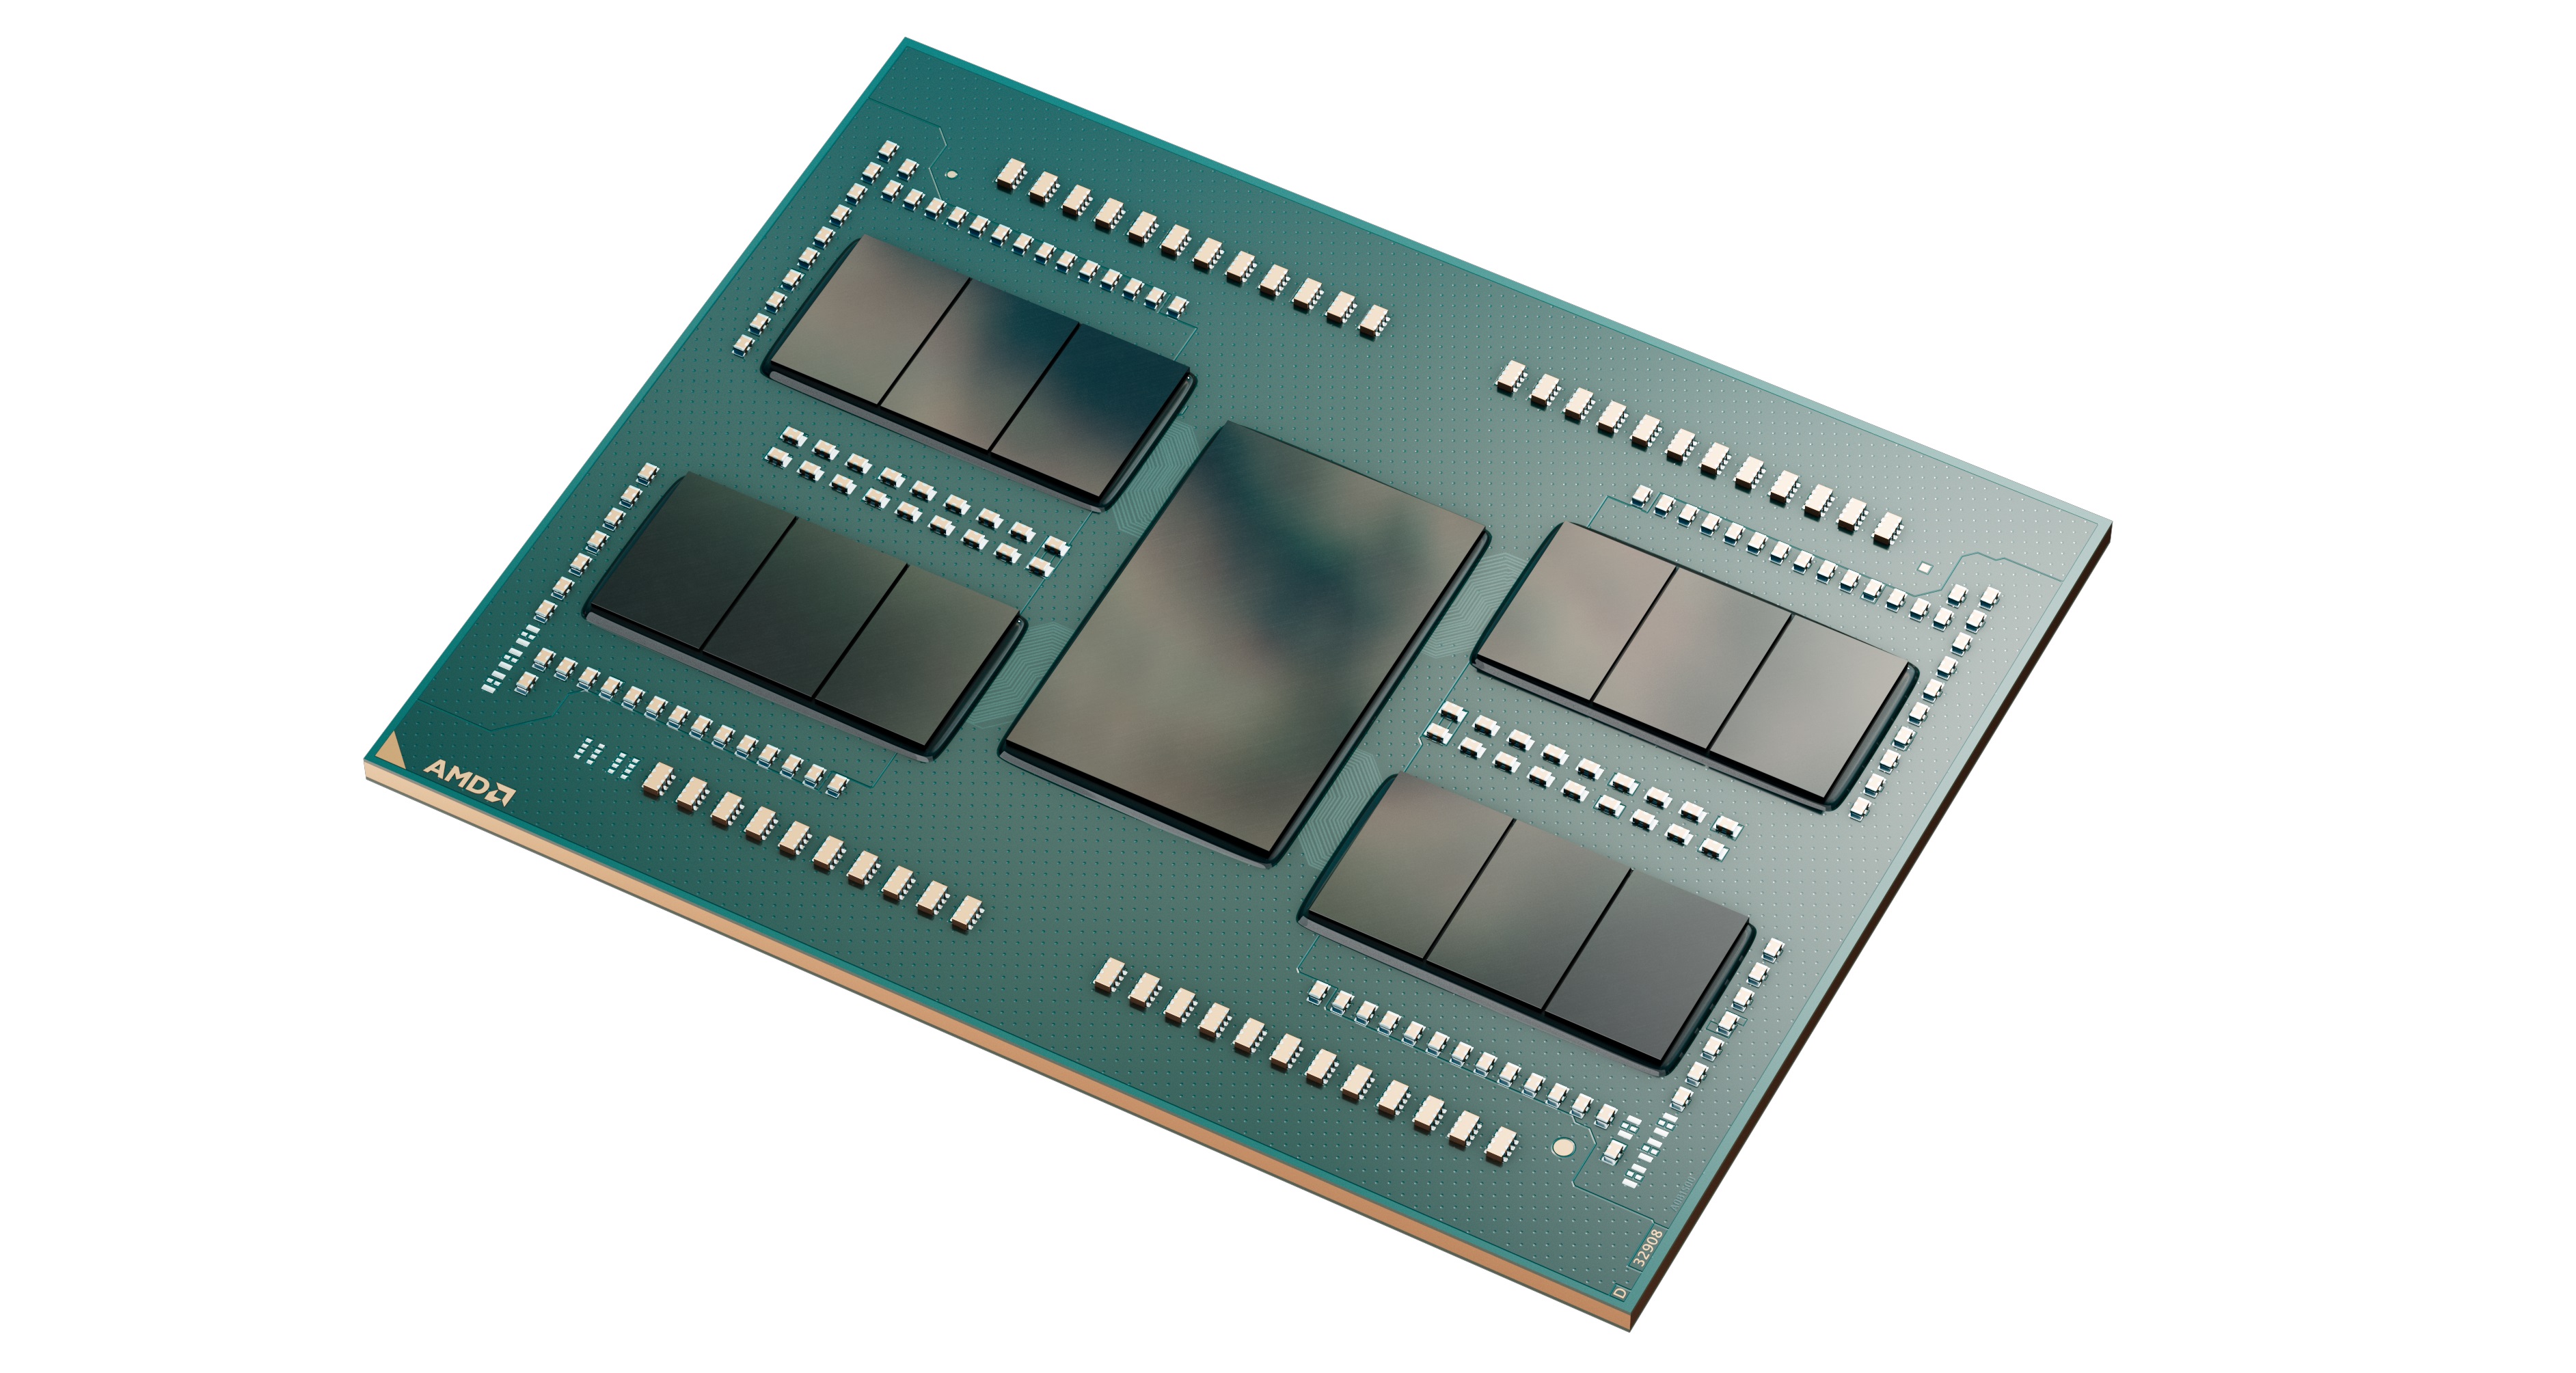 AMD Pro 695 Chipset Spotted - Potentially for Dual Thread Ripper Pro